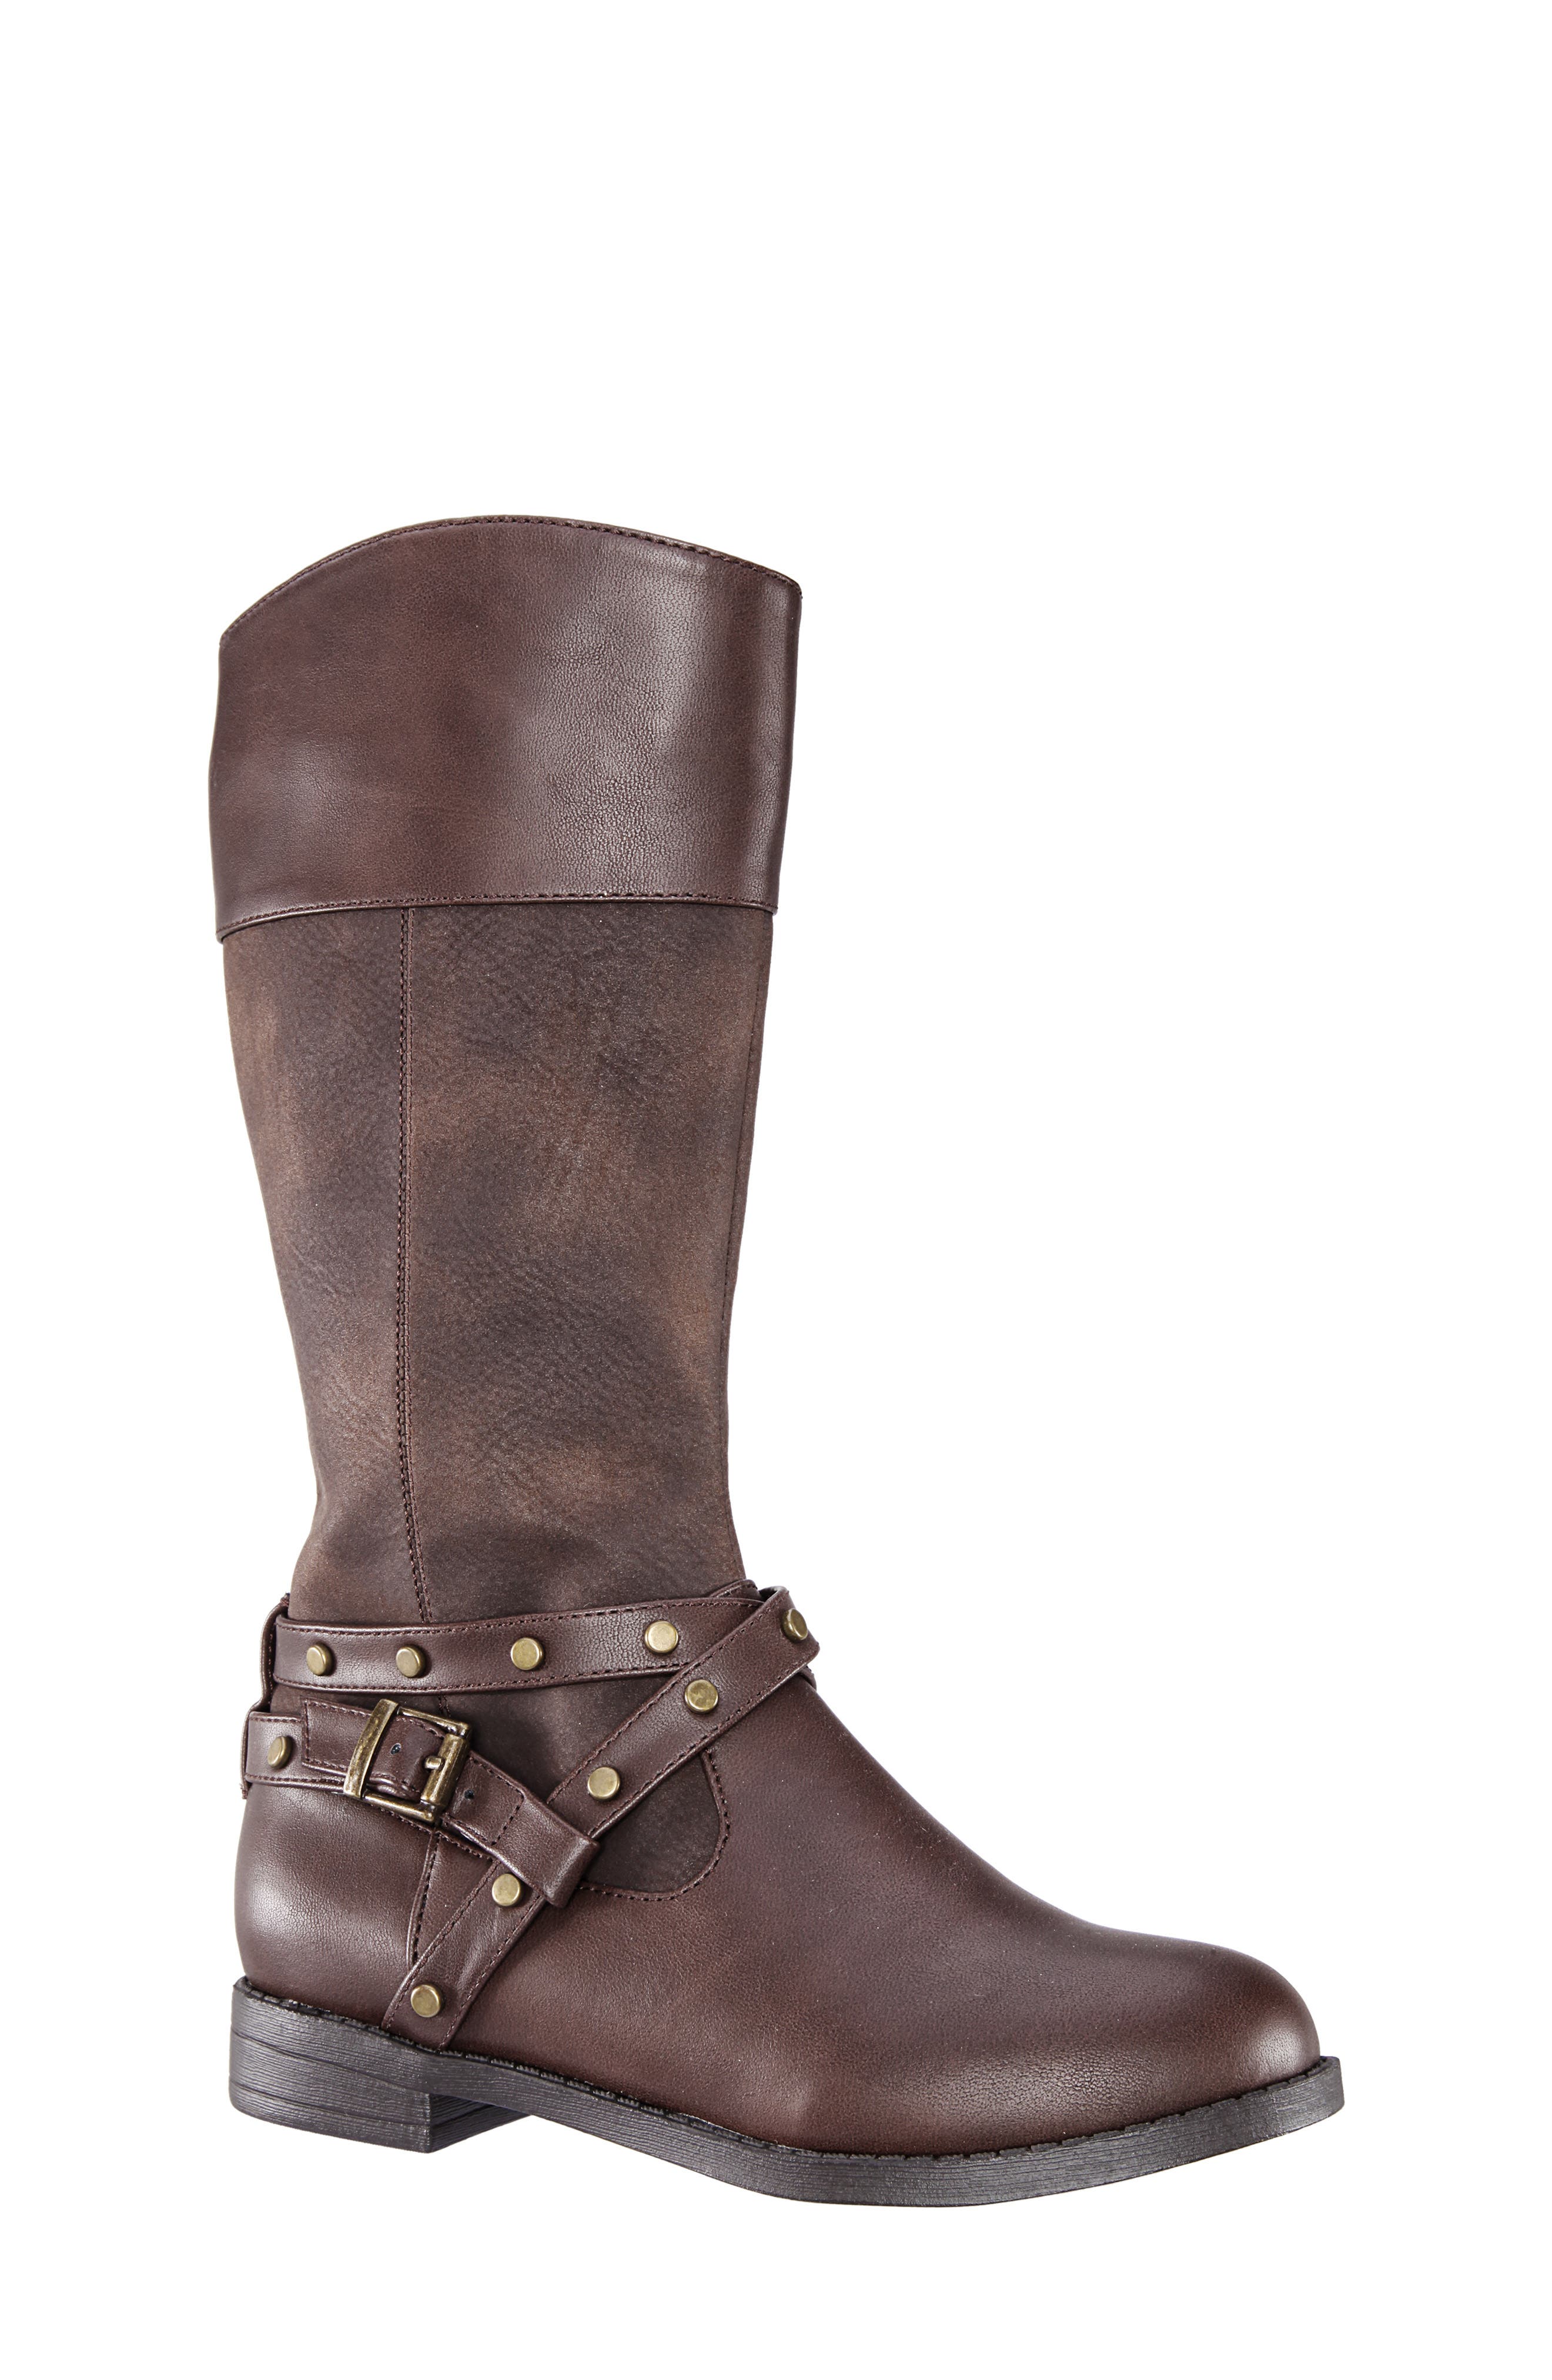 UPC 794378413042 product image for Toddler Girl's Nina Michele Boot, Size 11 M - Brown | upcitemdb.com